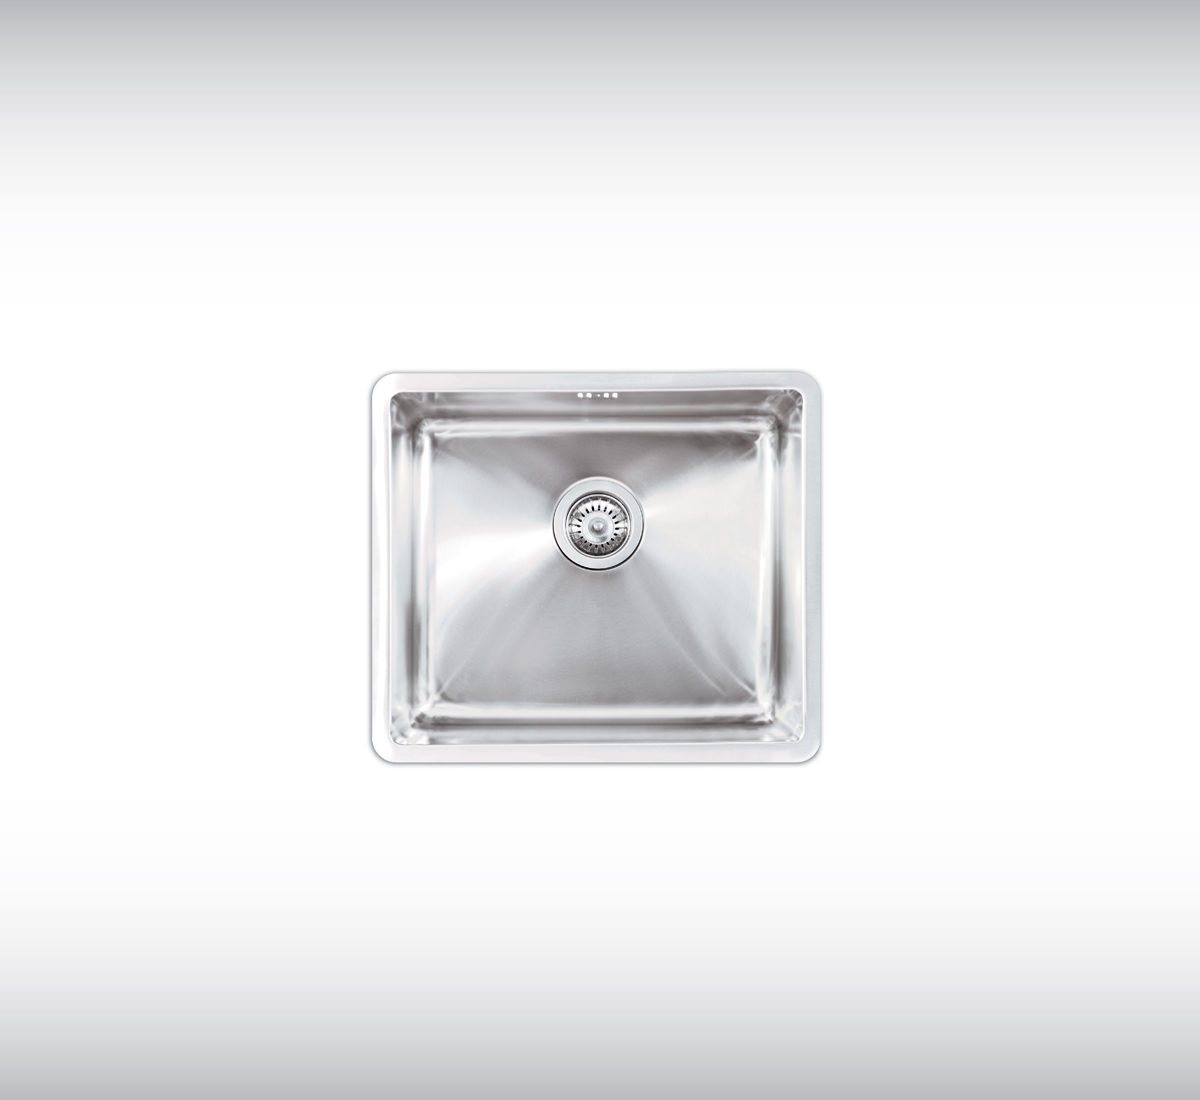 Stainless Steel Sink GINO-544